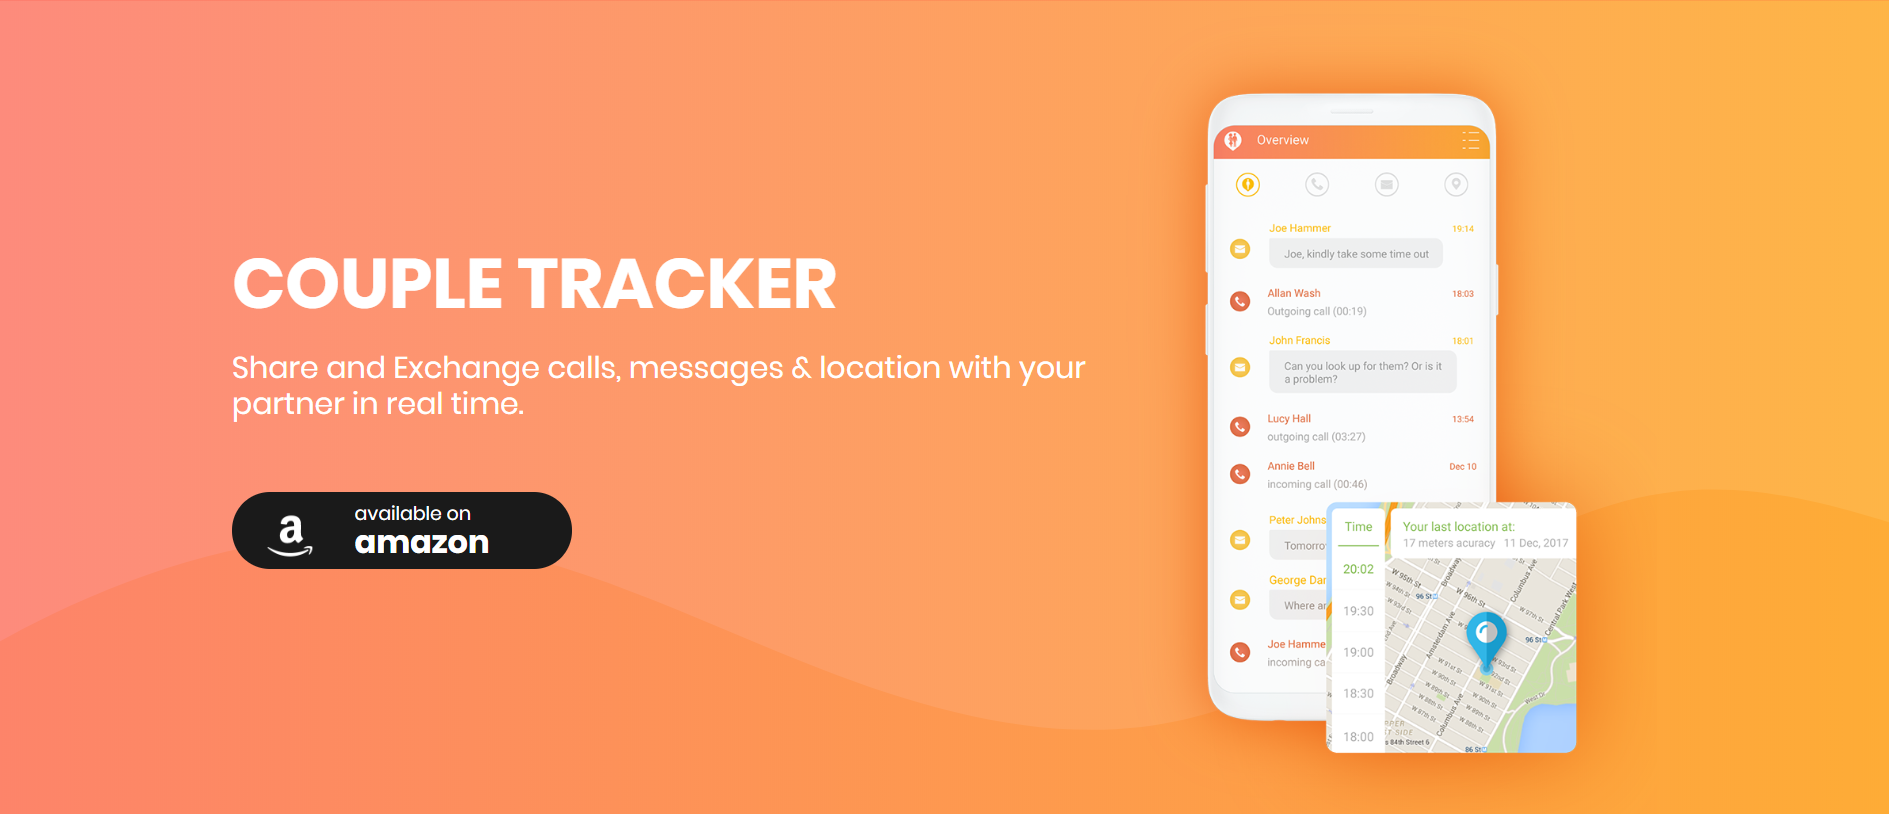 Couple Tracker - Free Phone and Partner tracking app